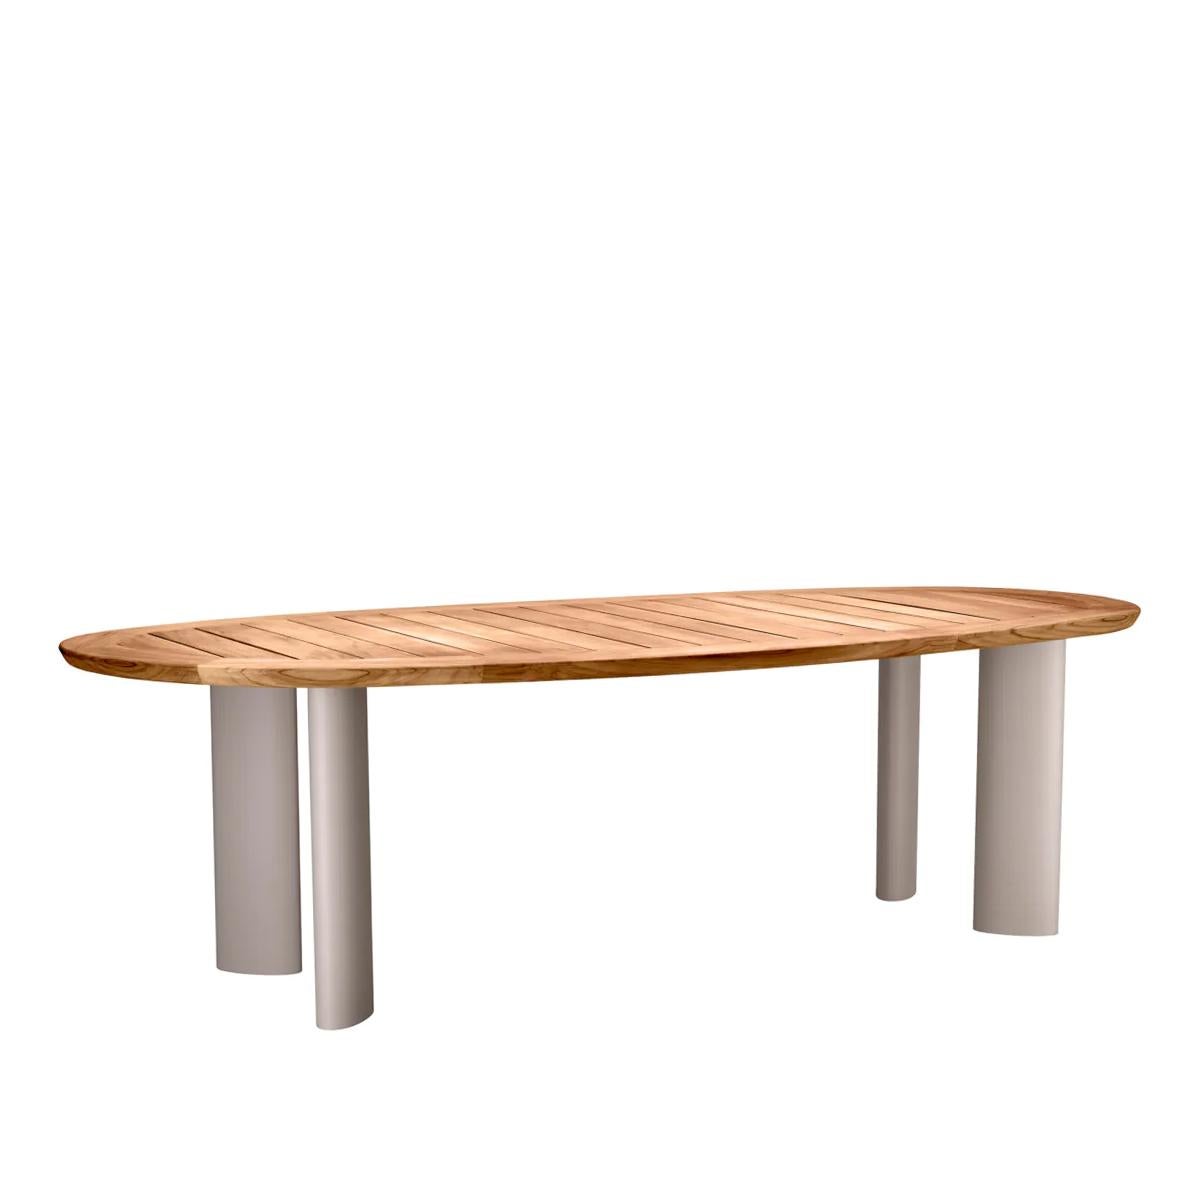 Dining Table Teeko Outdoor with top in solid teak in natural finish
and with feet in aluminium in powder coated matte sand color finish.